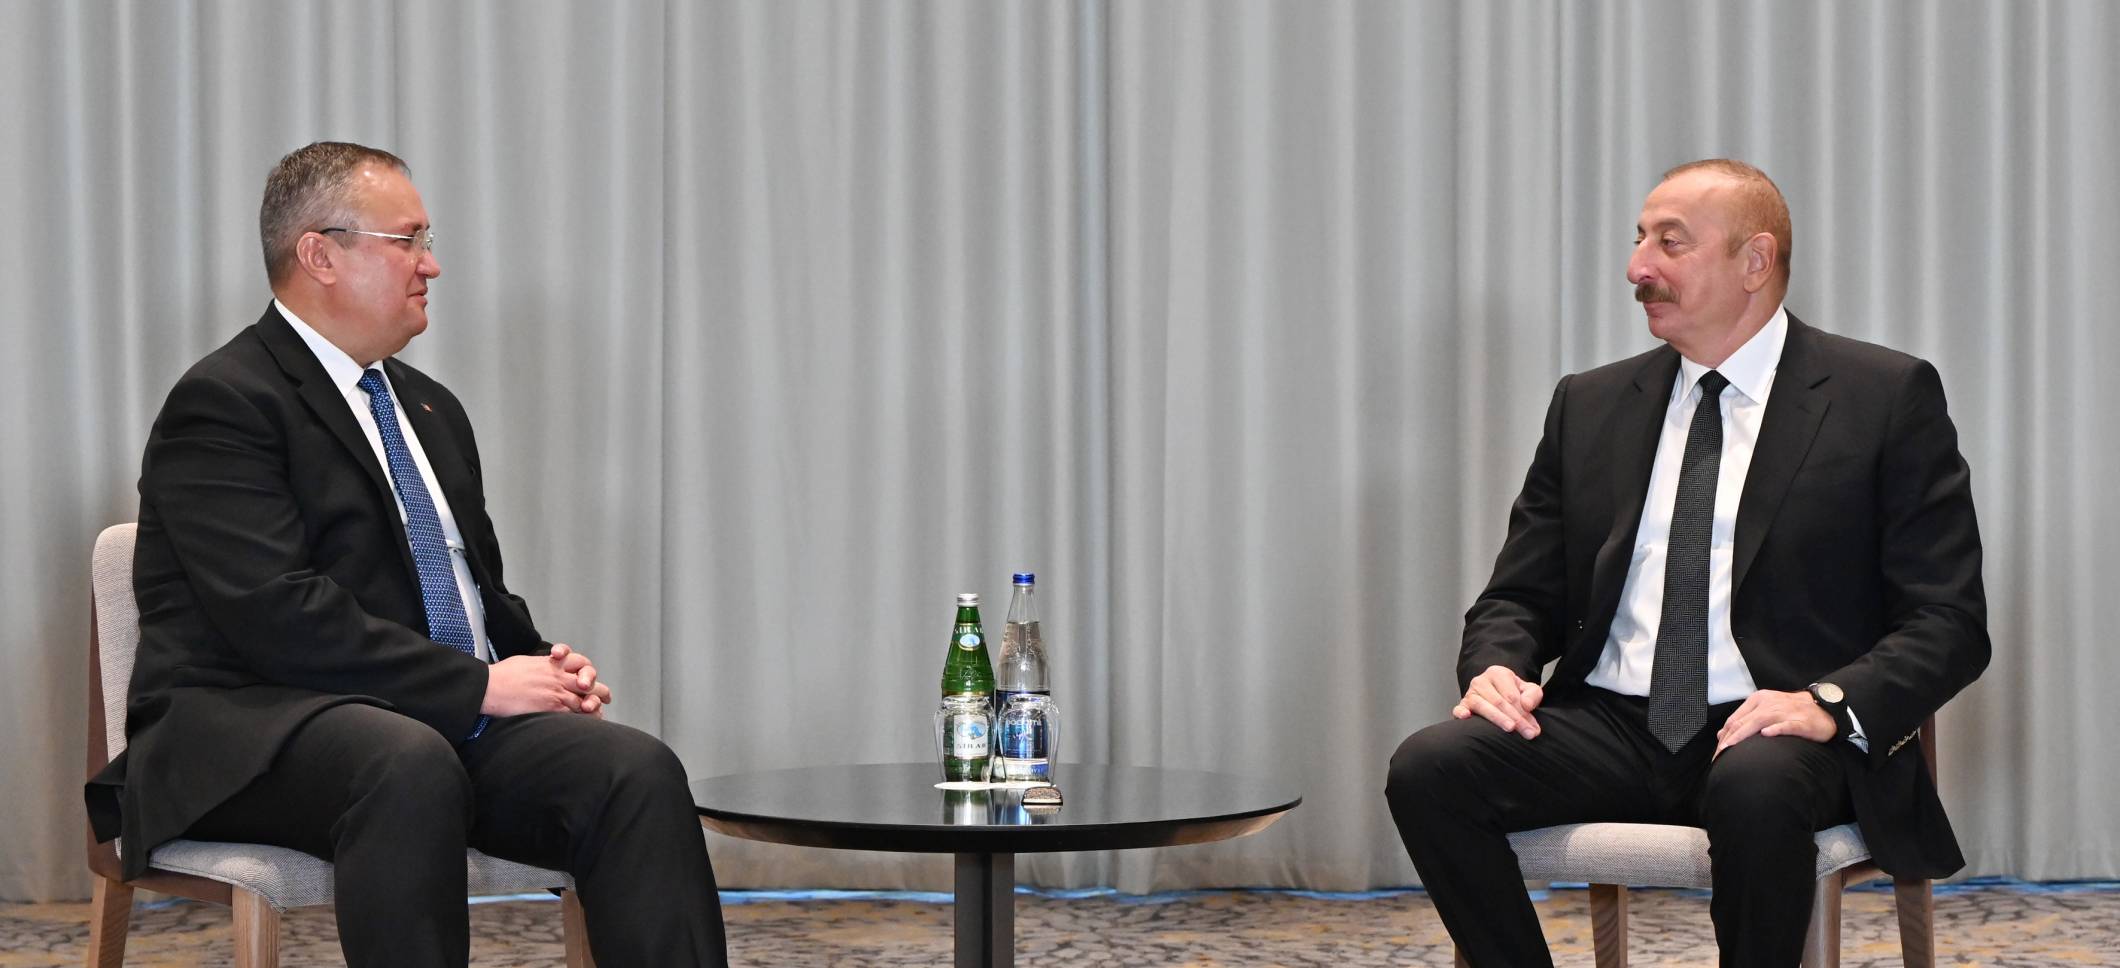 Ilham Aliyev met with Prime Minister of Romania in Sofia